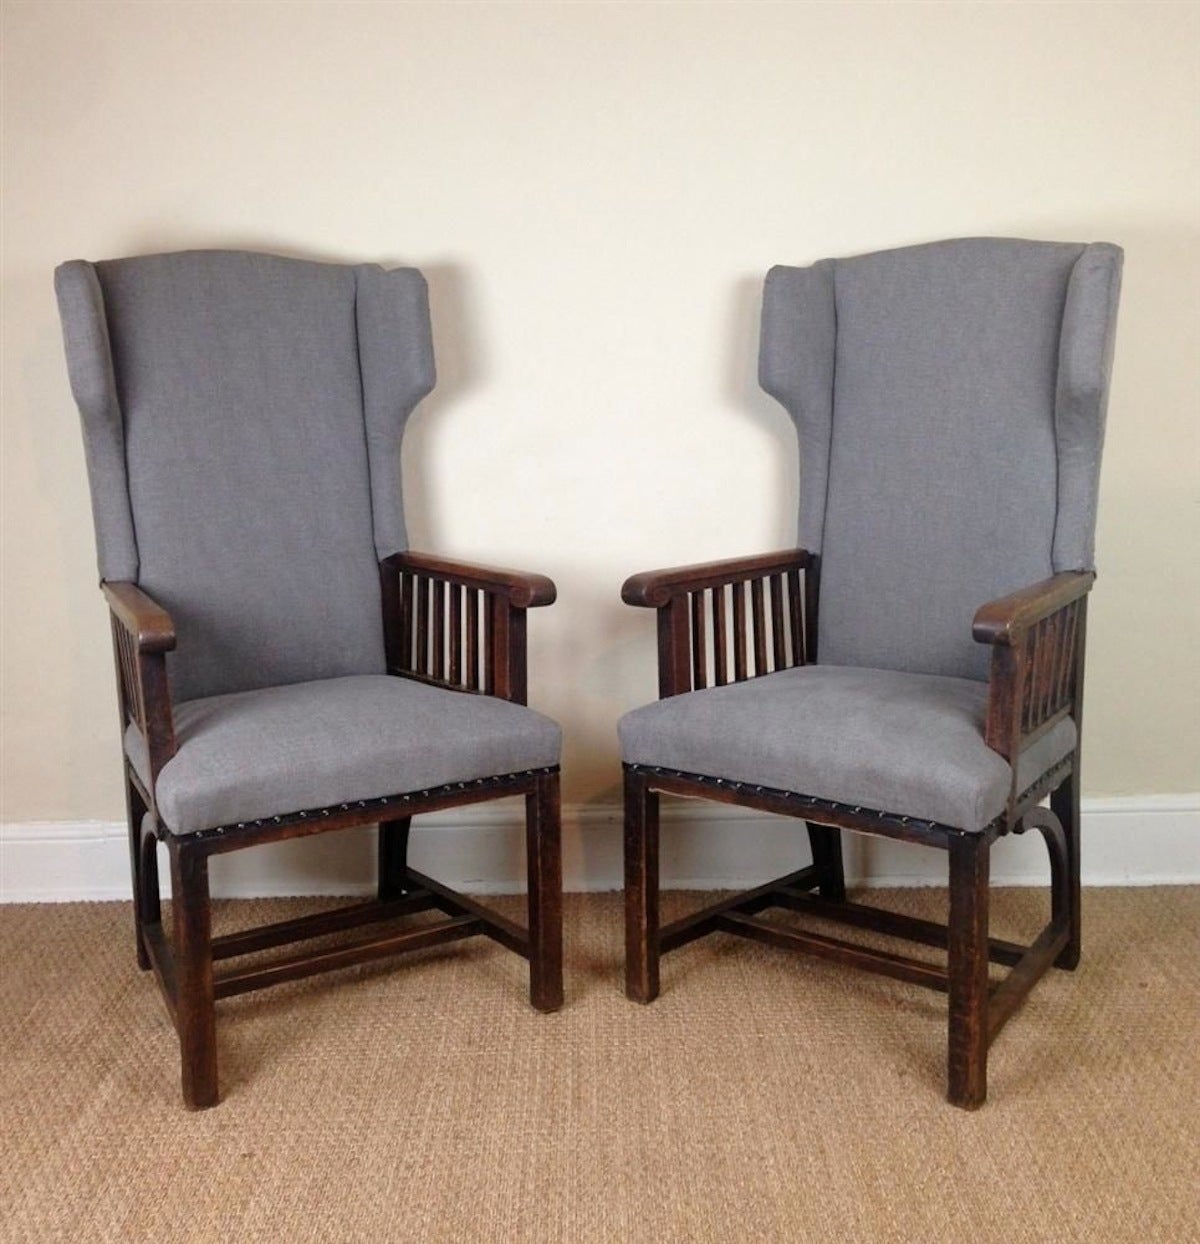 English pair of 1900's Arts and Crafts high back upholstered wing chairs.  The wooden arms and legs are exposed.
The chairs have been recently reupholstered in blue and grey cotton fabric.
They are in excellent condition and will arrive in April.